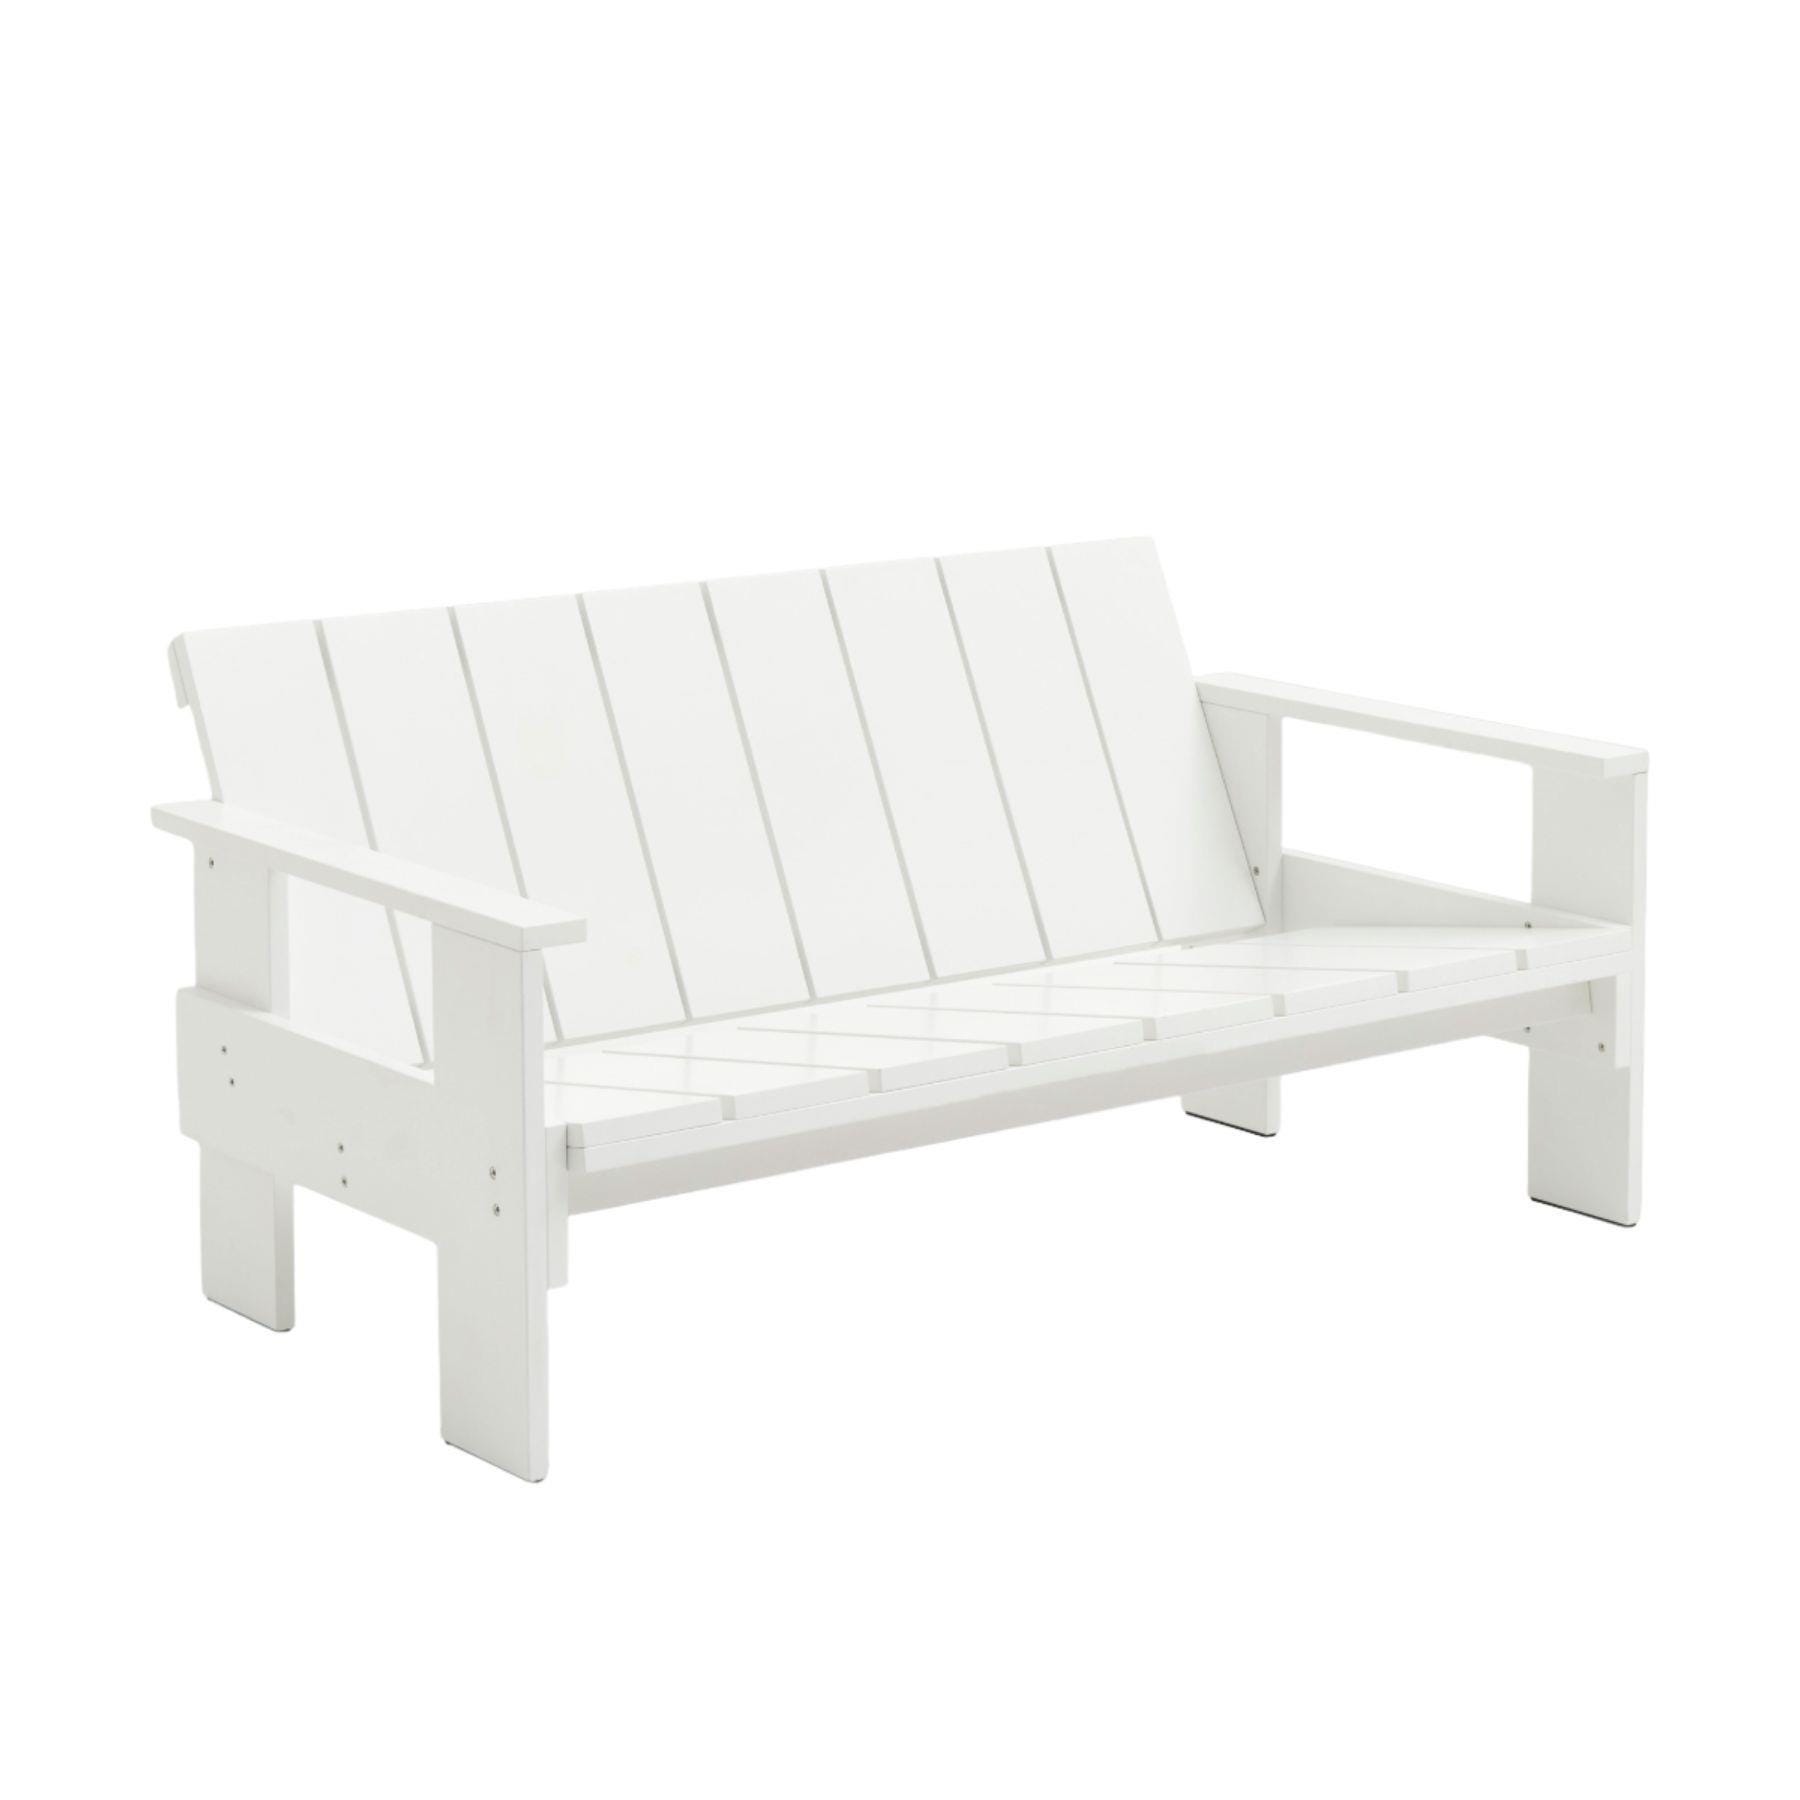 Hay Crate Lounge Sofa White Designer Furniture From Holloways Of Ludlow